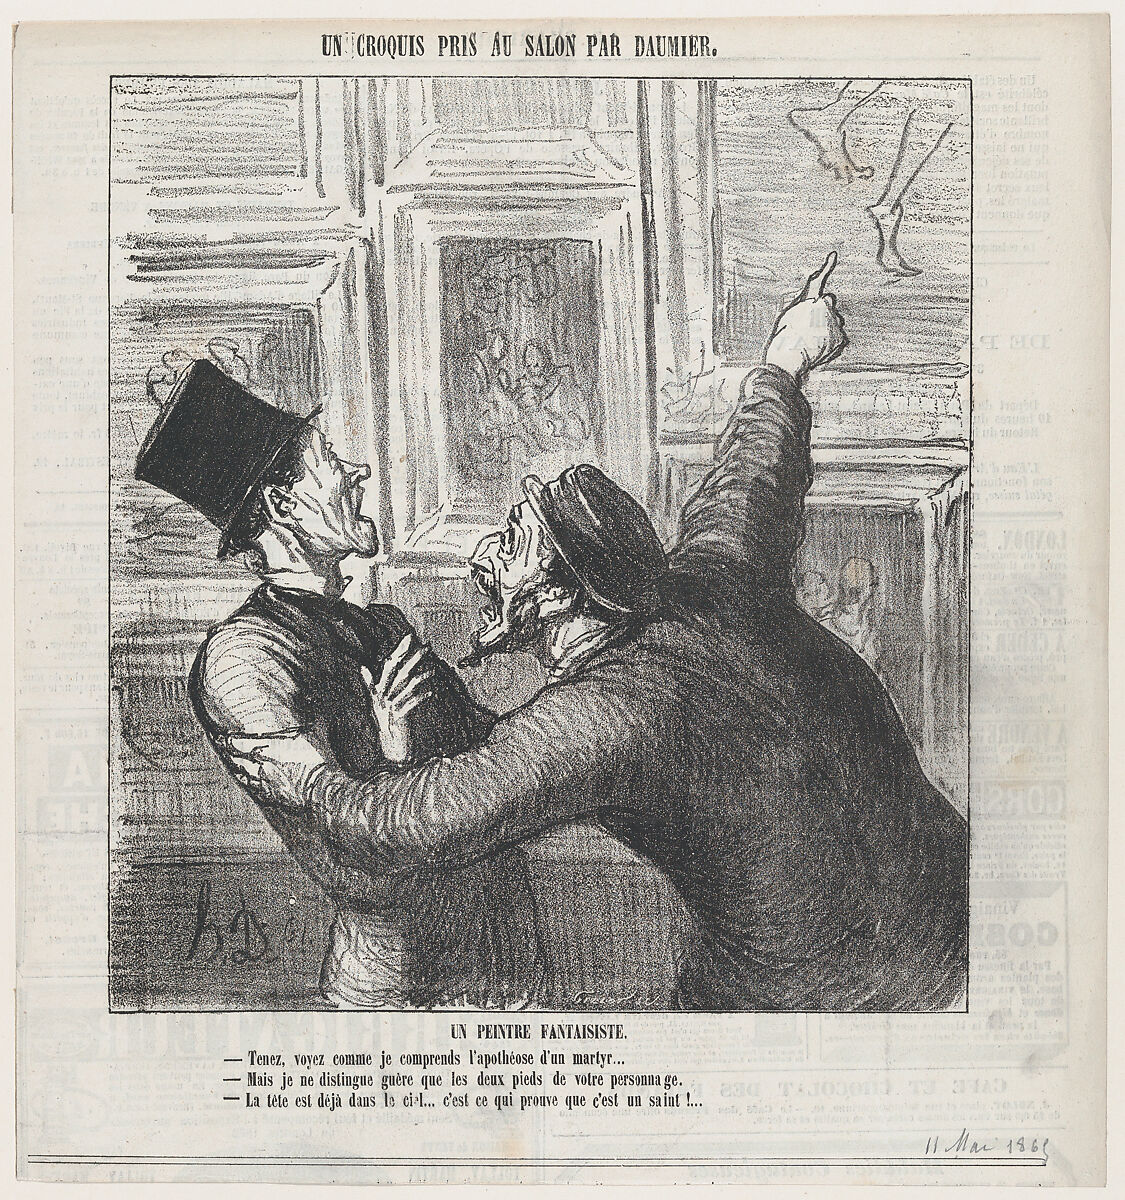 A fantastic painter, from 'A sketch from the Salon,' published in Le Charivari, May 11, 1865, Honoré Daumier (French, Marseilles 1808–1879 Valmondois), Lithograph on newsprint; second state of two (Delteil) 